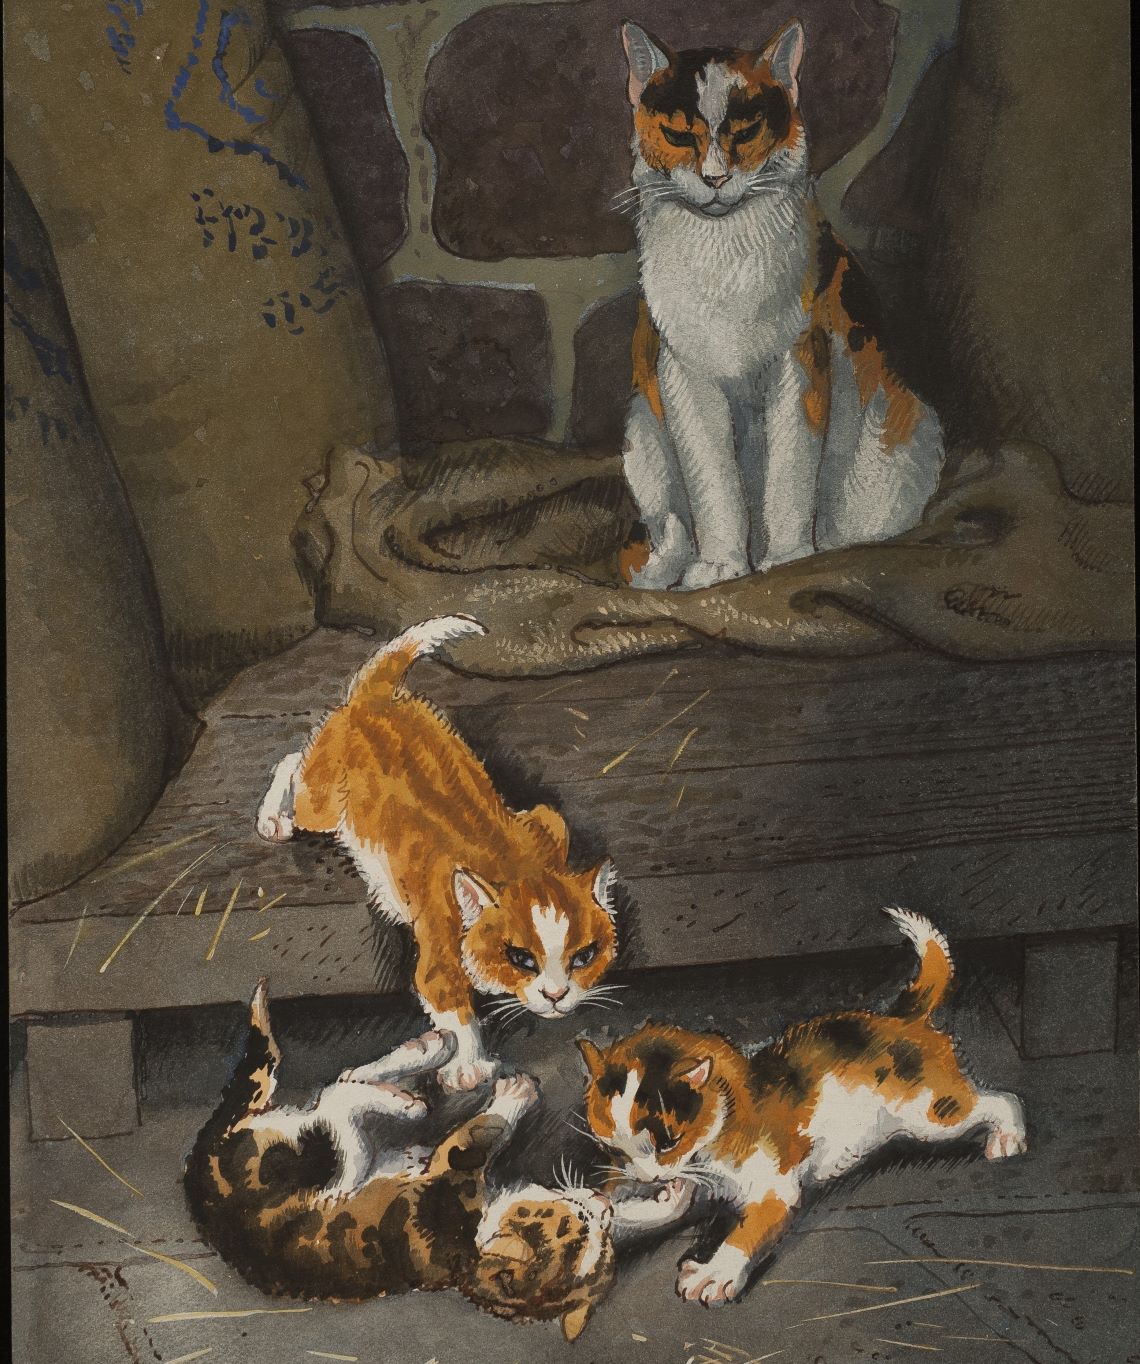 Image from a Ladybird book of a cat looking at kittens